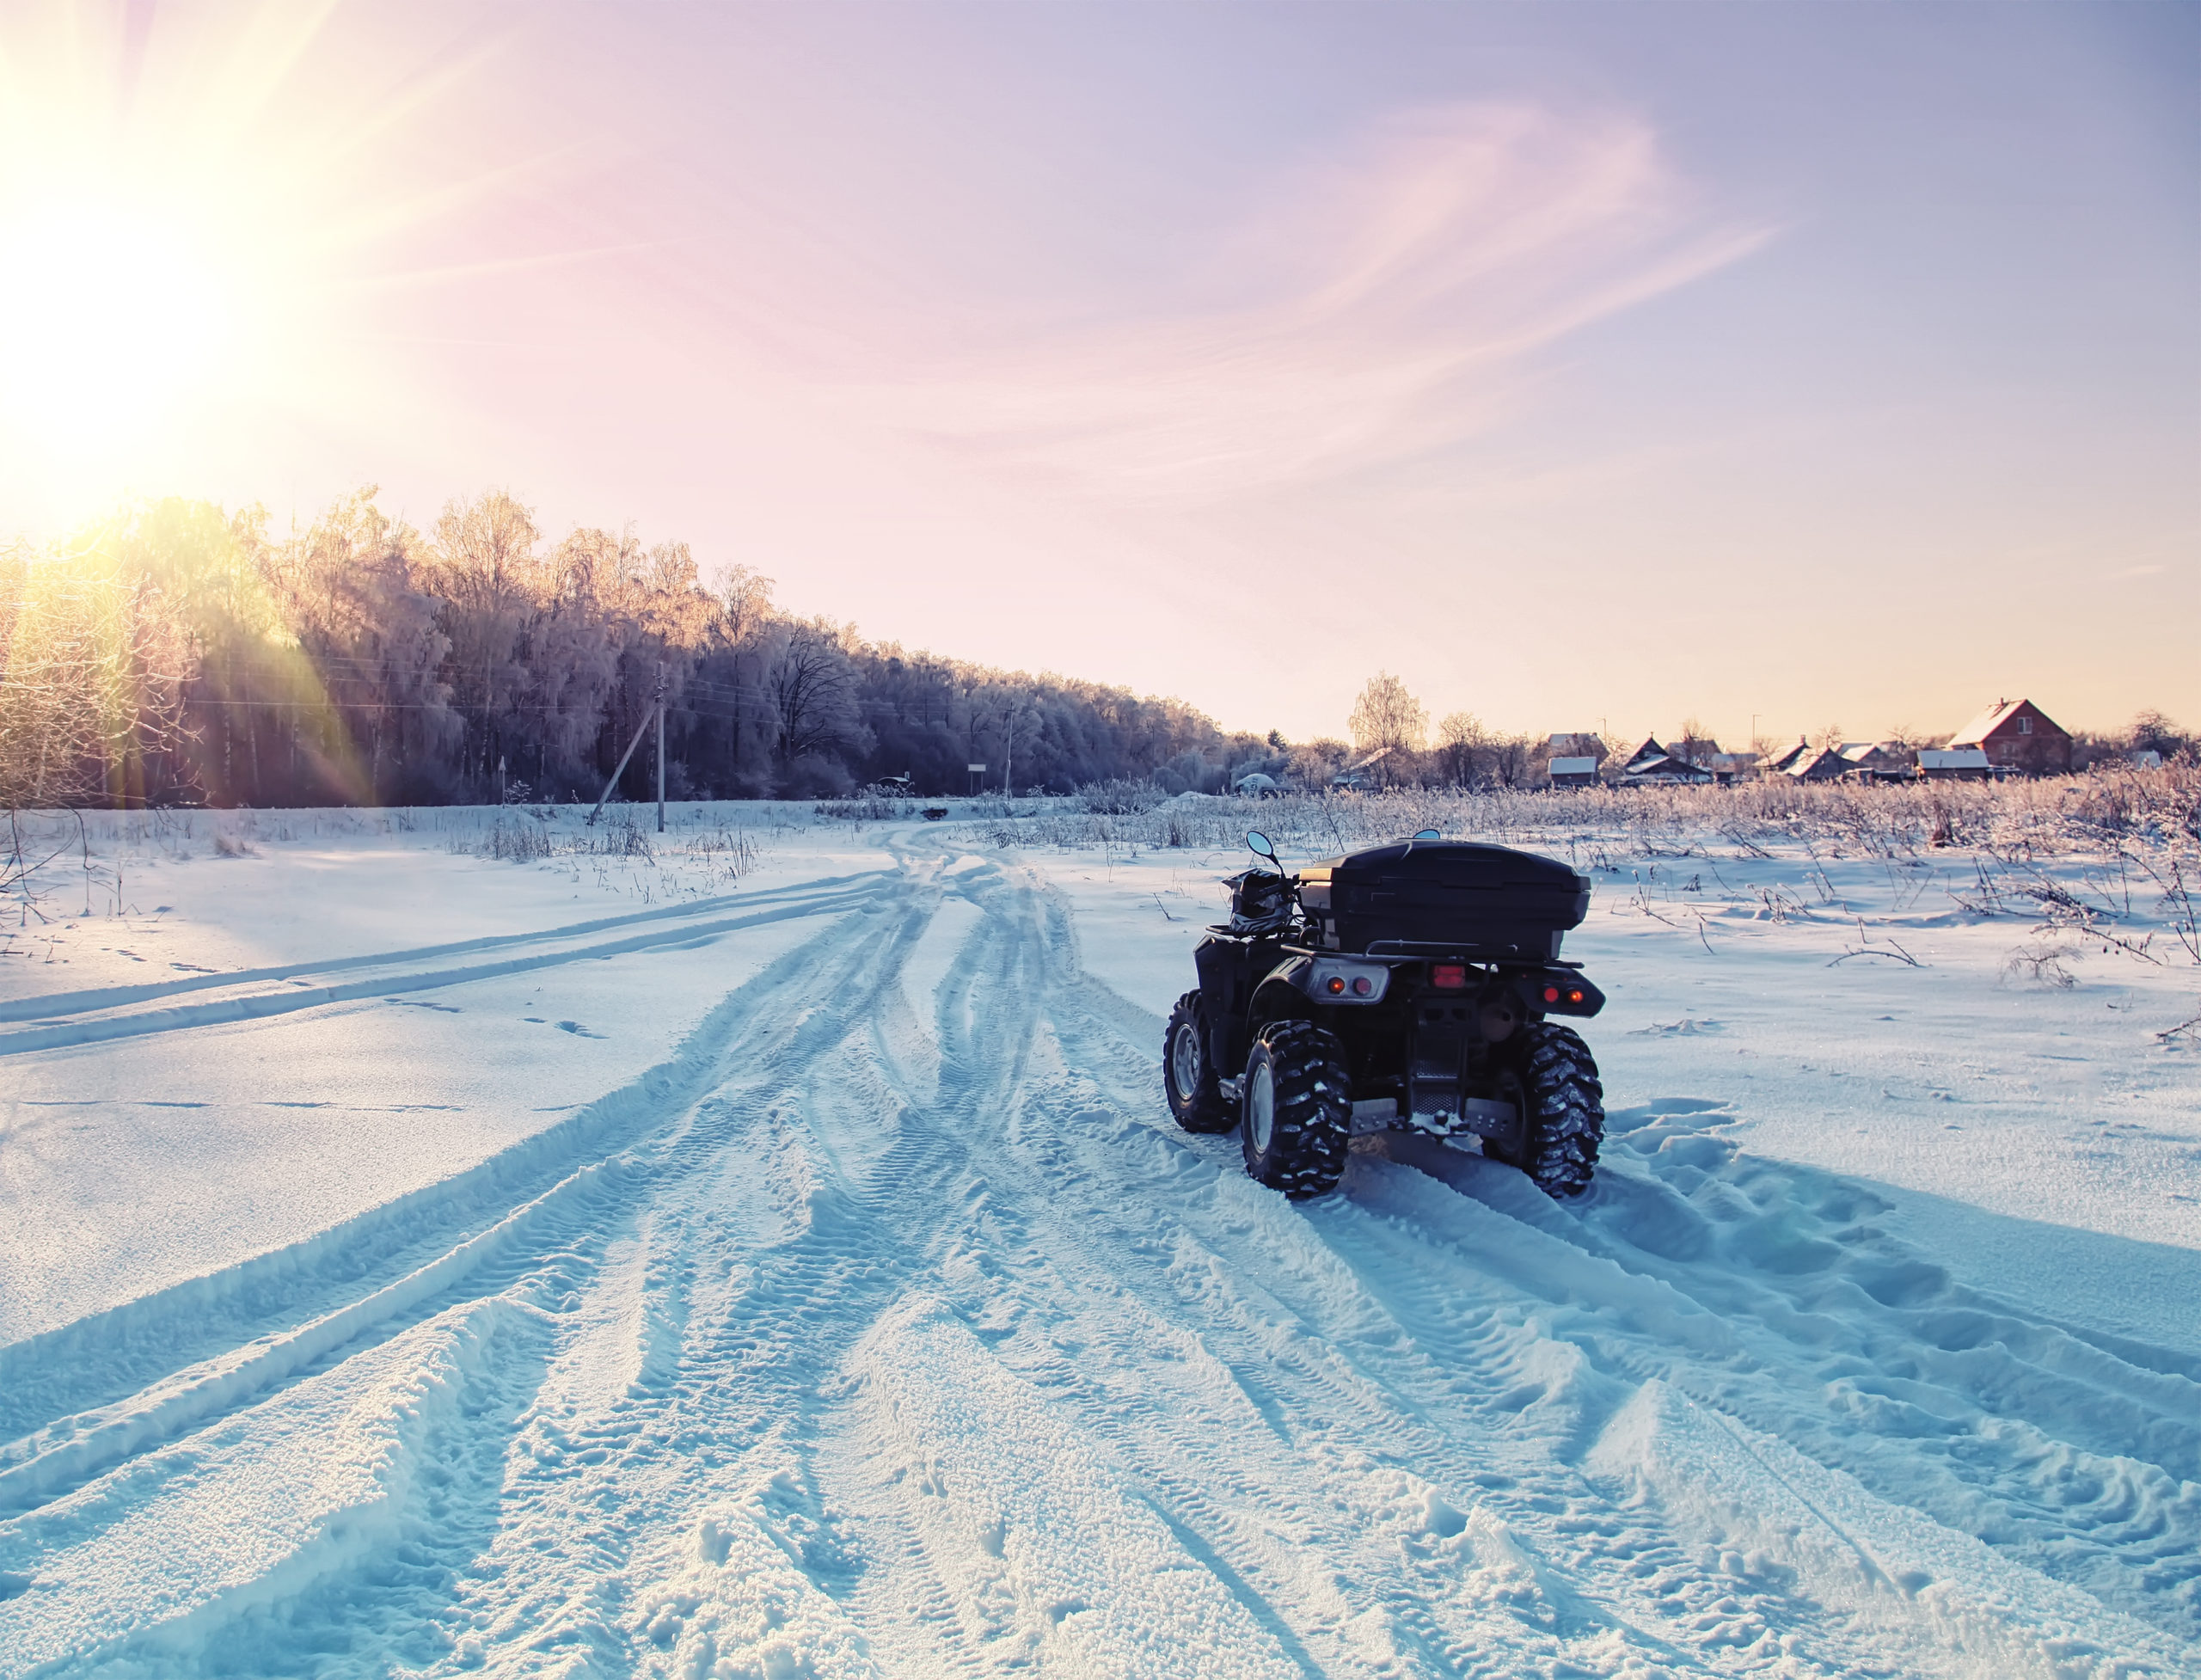 Quad,Bike,On,A,Winter,Road,In,A,Field,At